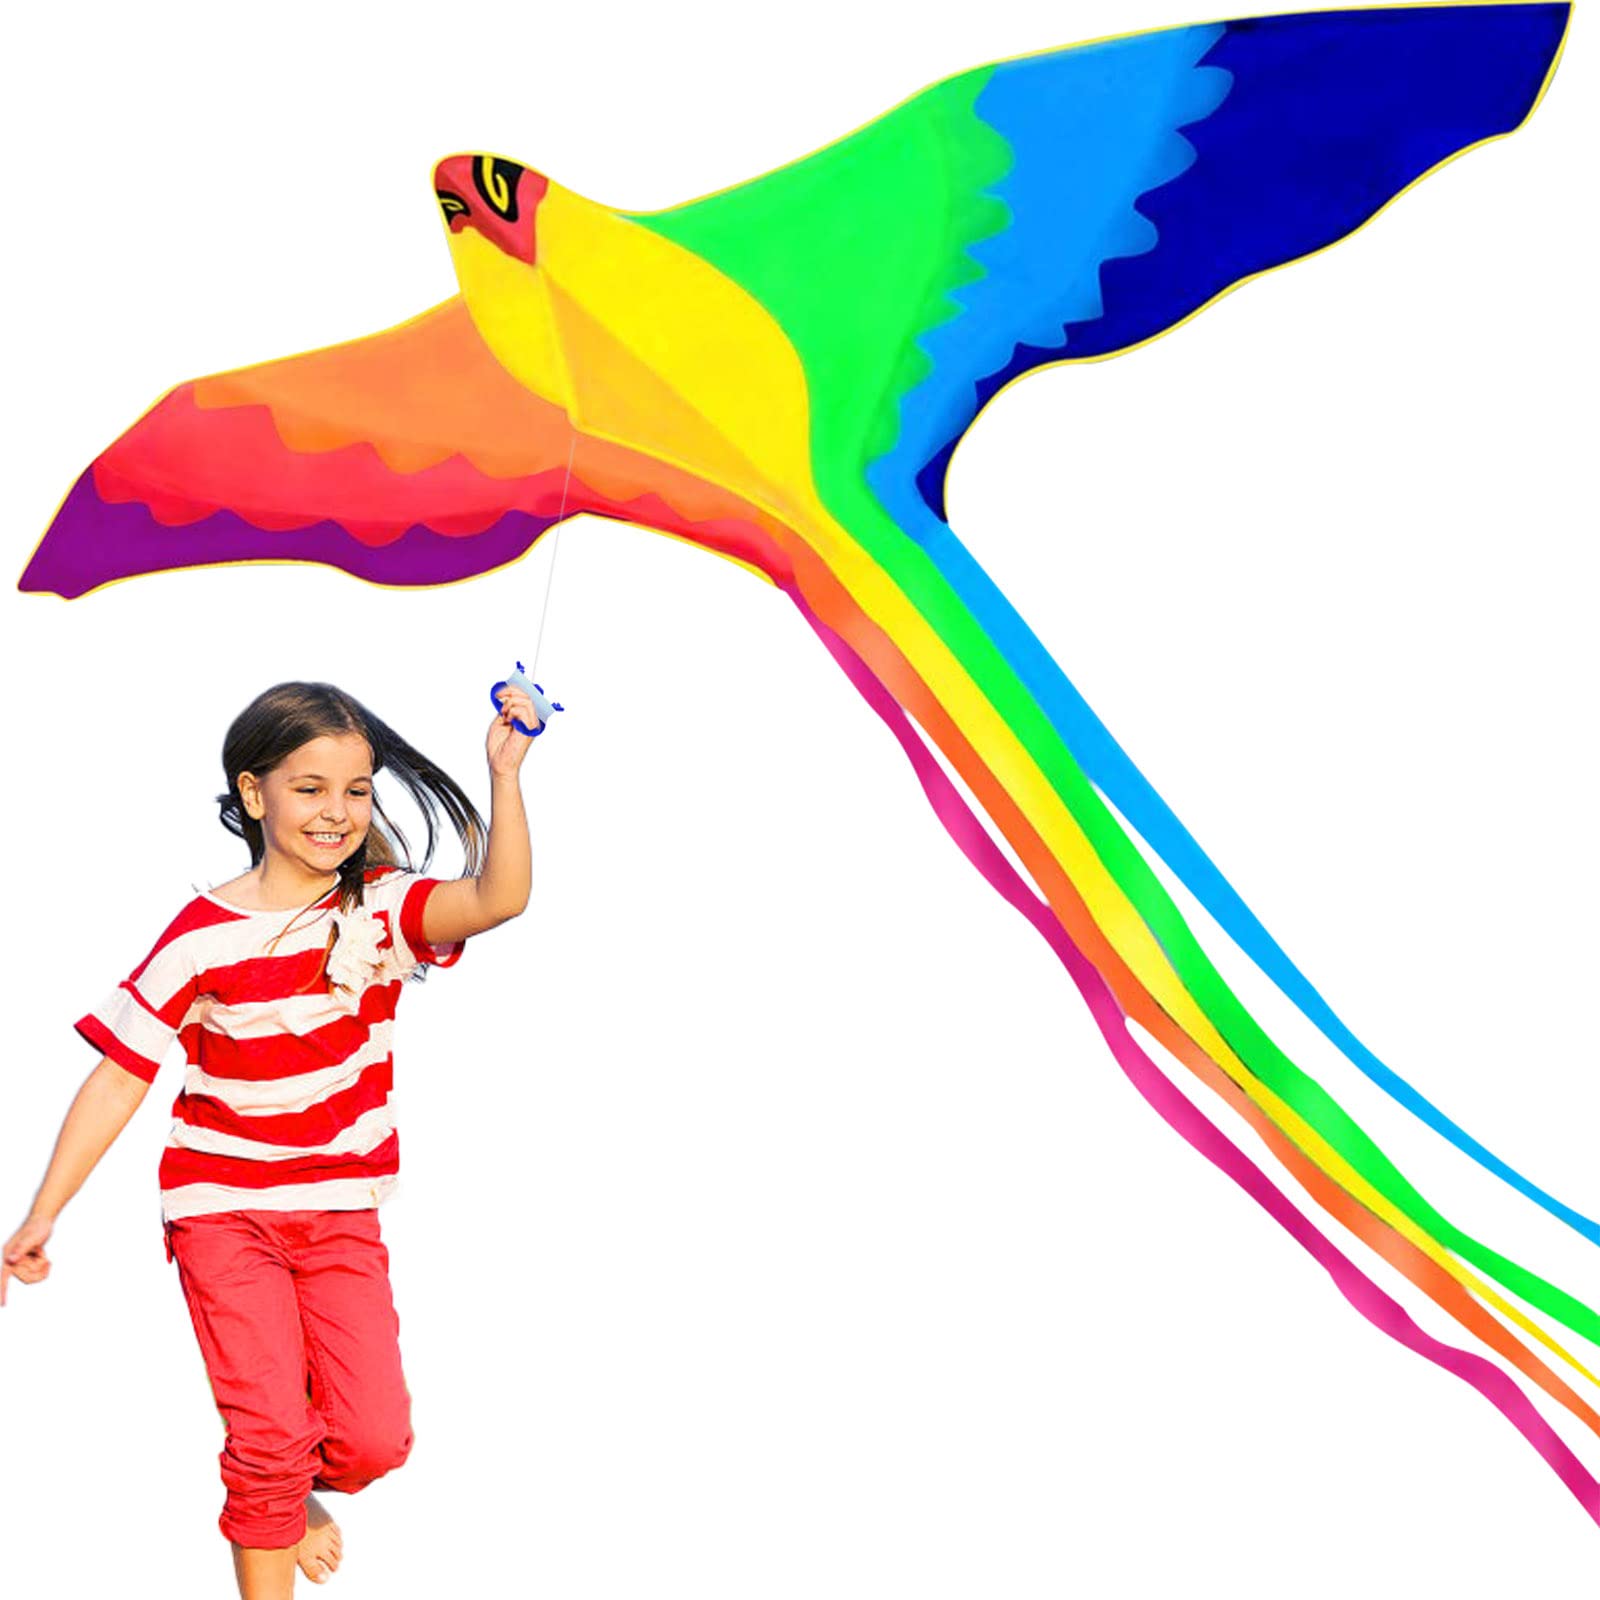 HENGDA KITE-Strong Phoenix for Kids & Adults, with Long Colorful Tail!Huge Beginner Colorful Rainbow Bird Phoenix Kites 74-Inch